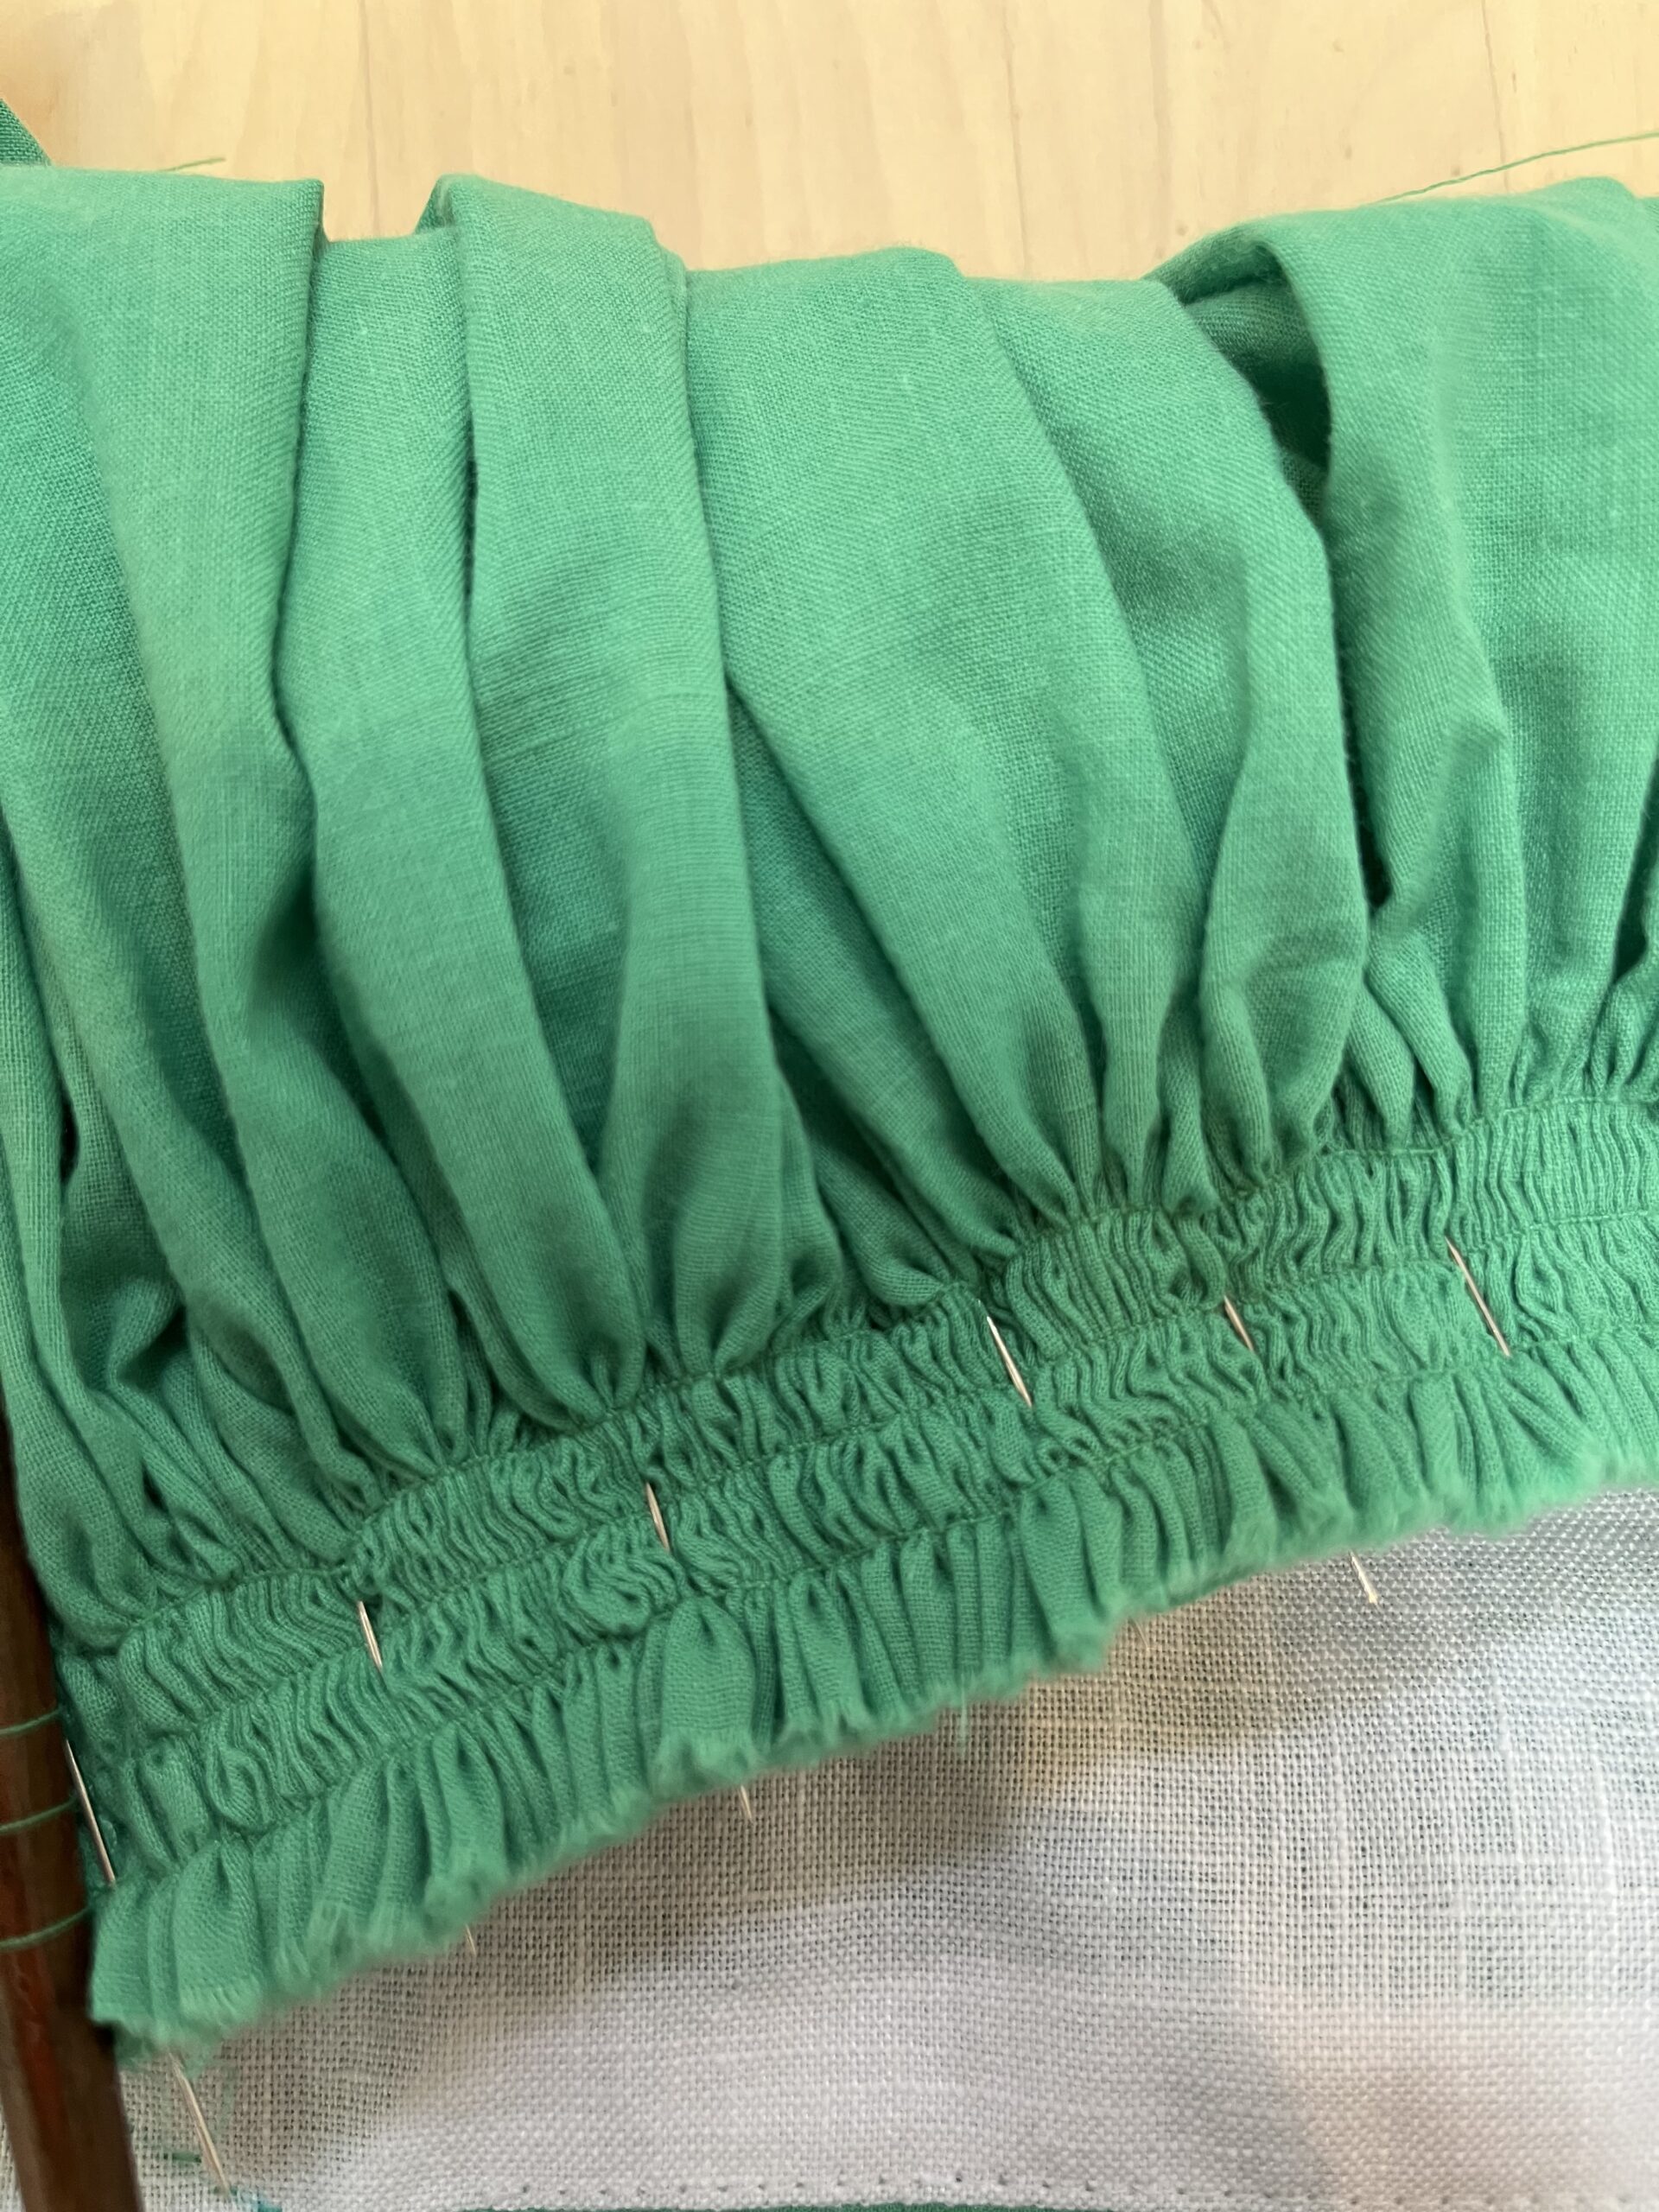 A close-up view of three rows of gathering on green cotton voile.